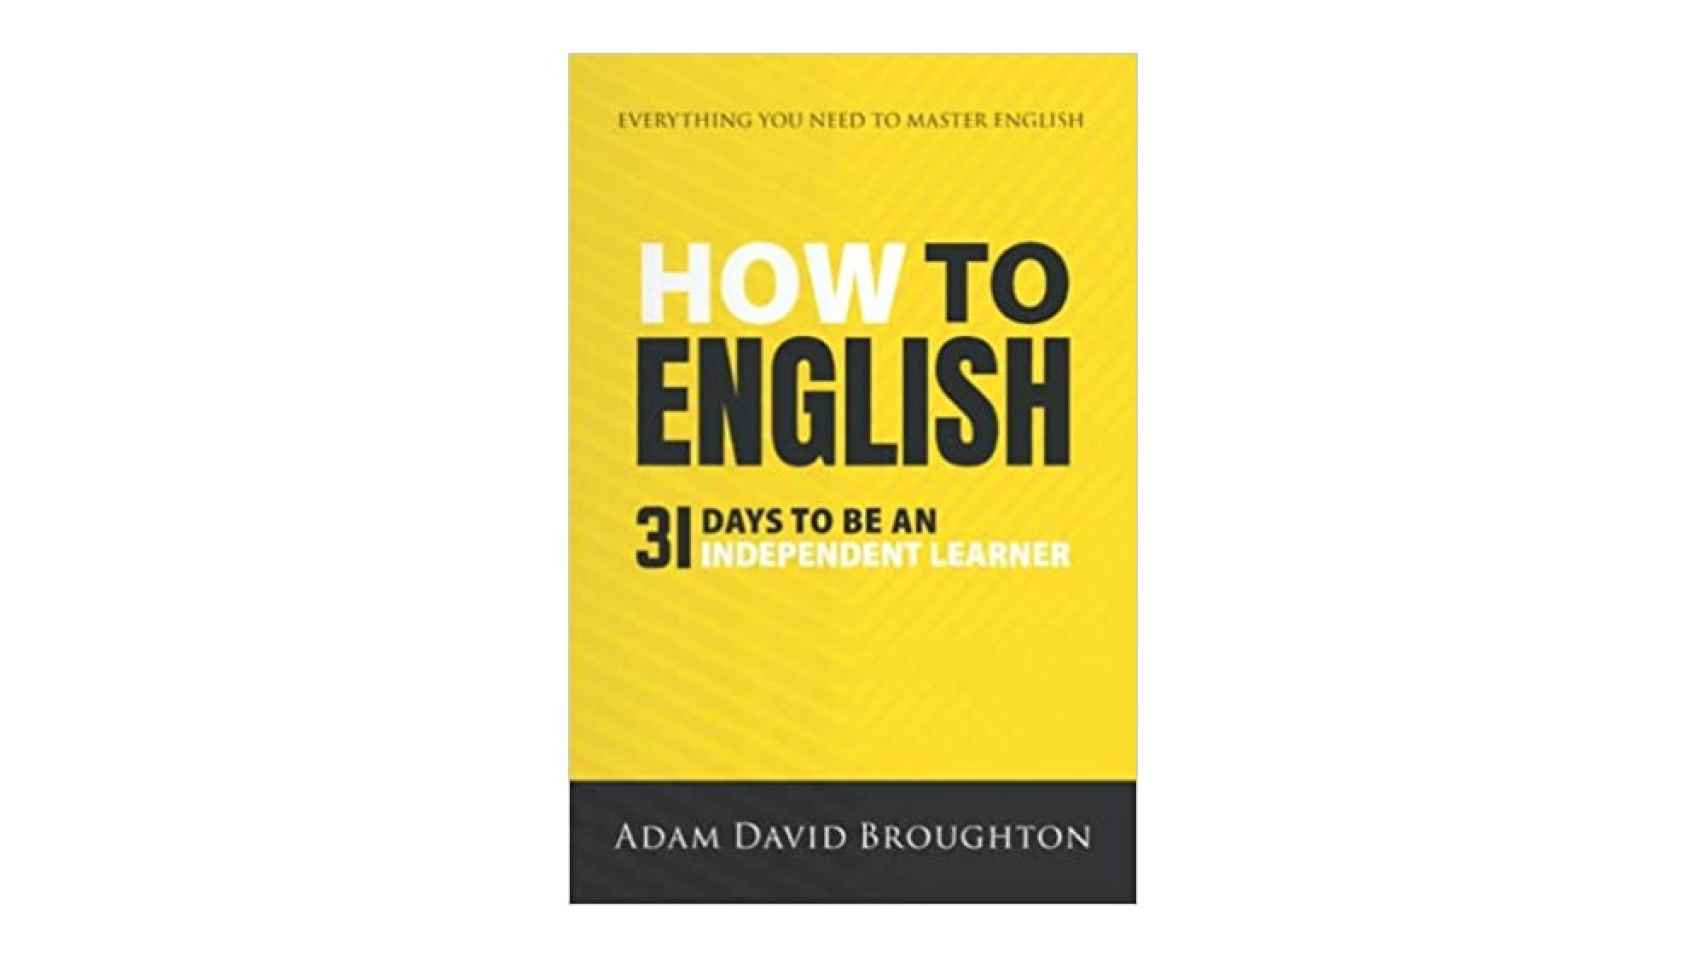 'How To English 31 days to be an independent learner'